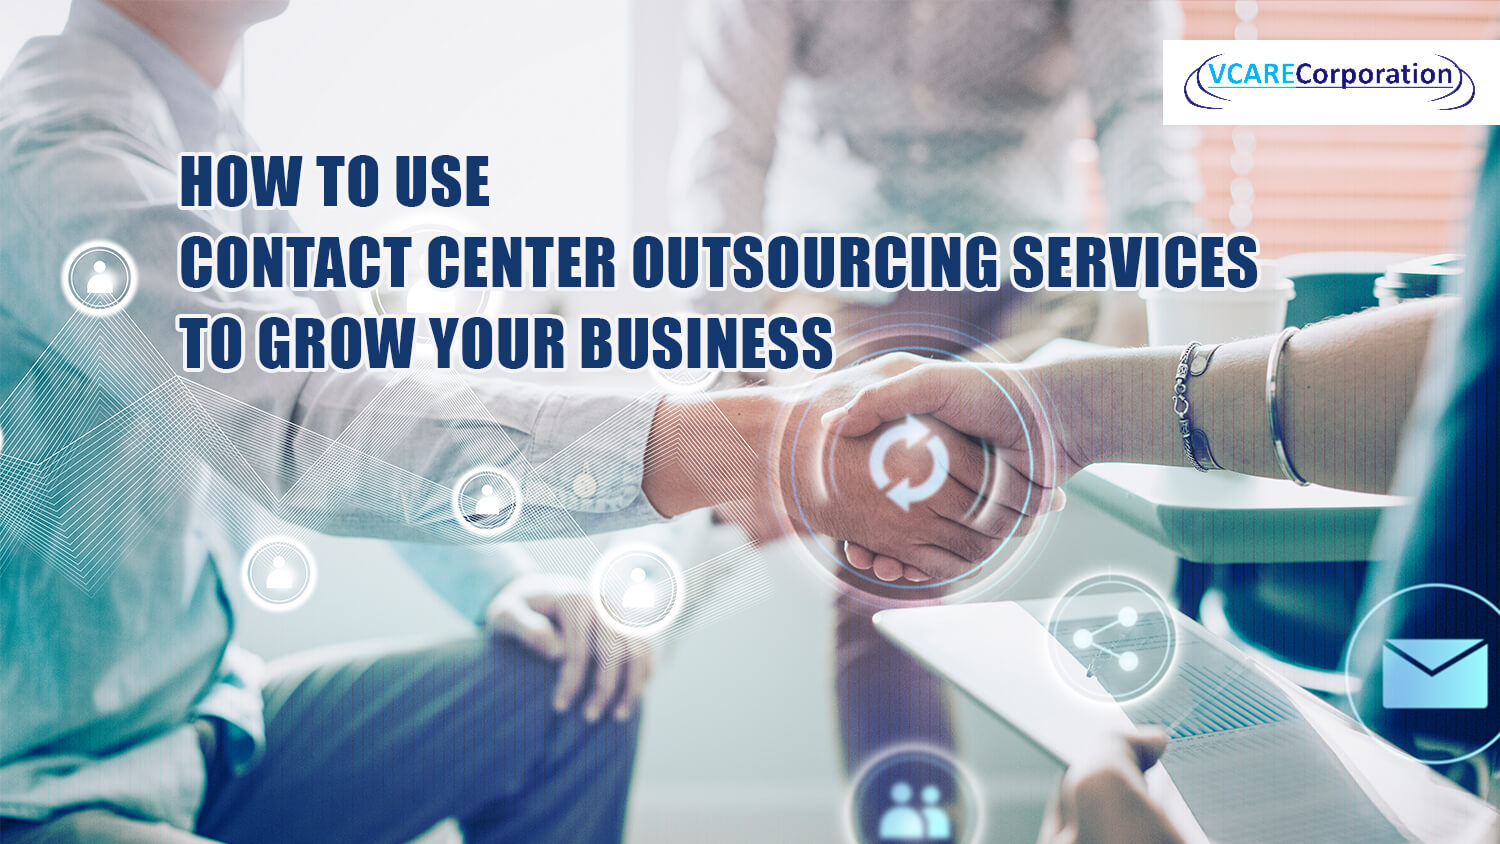 How to Use Contact Center Outsourcing Services to Grow Your Business-1b24ddf8